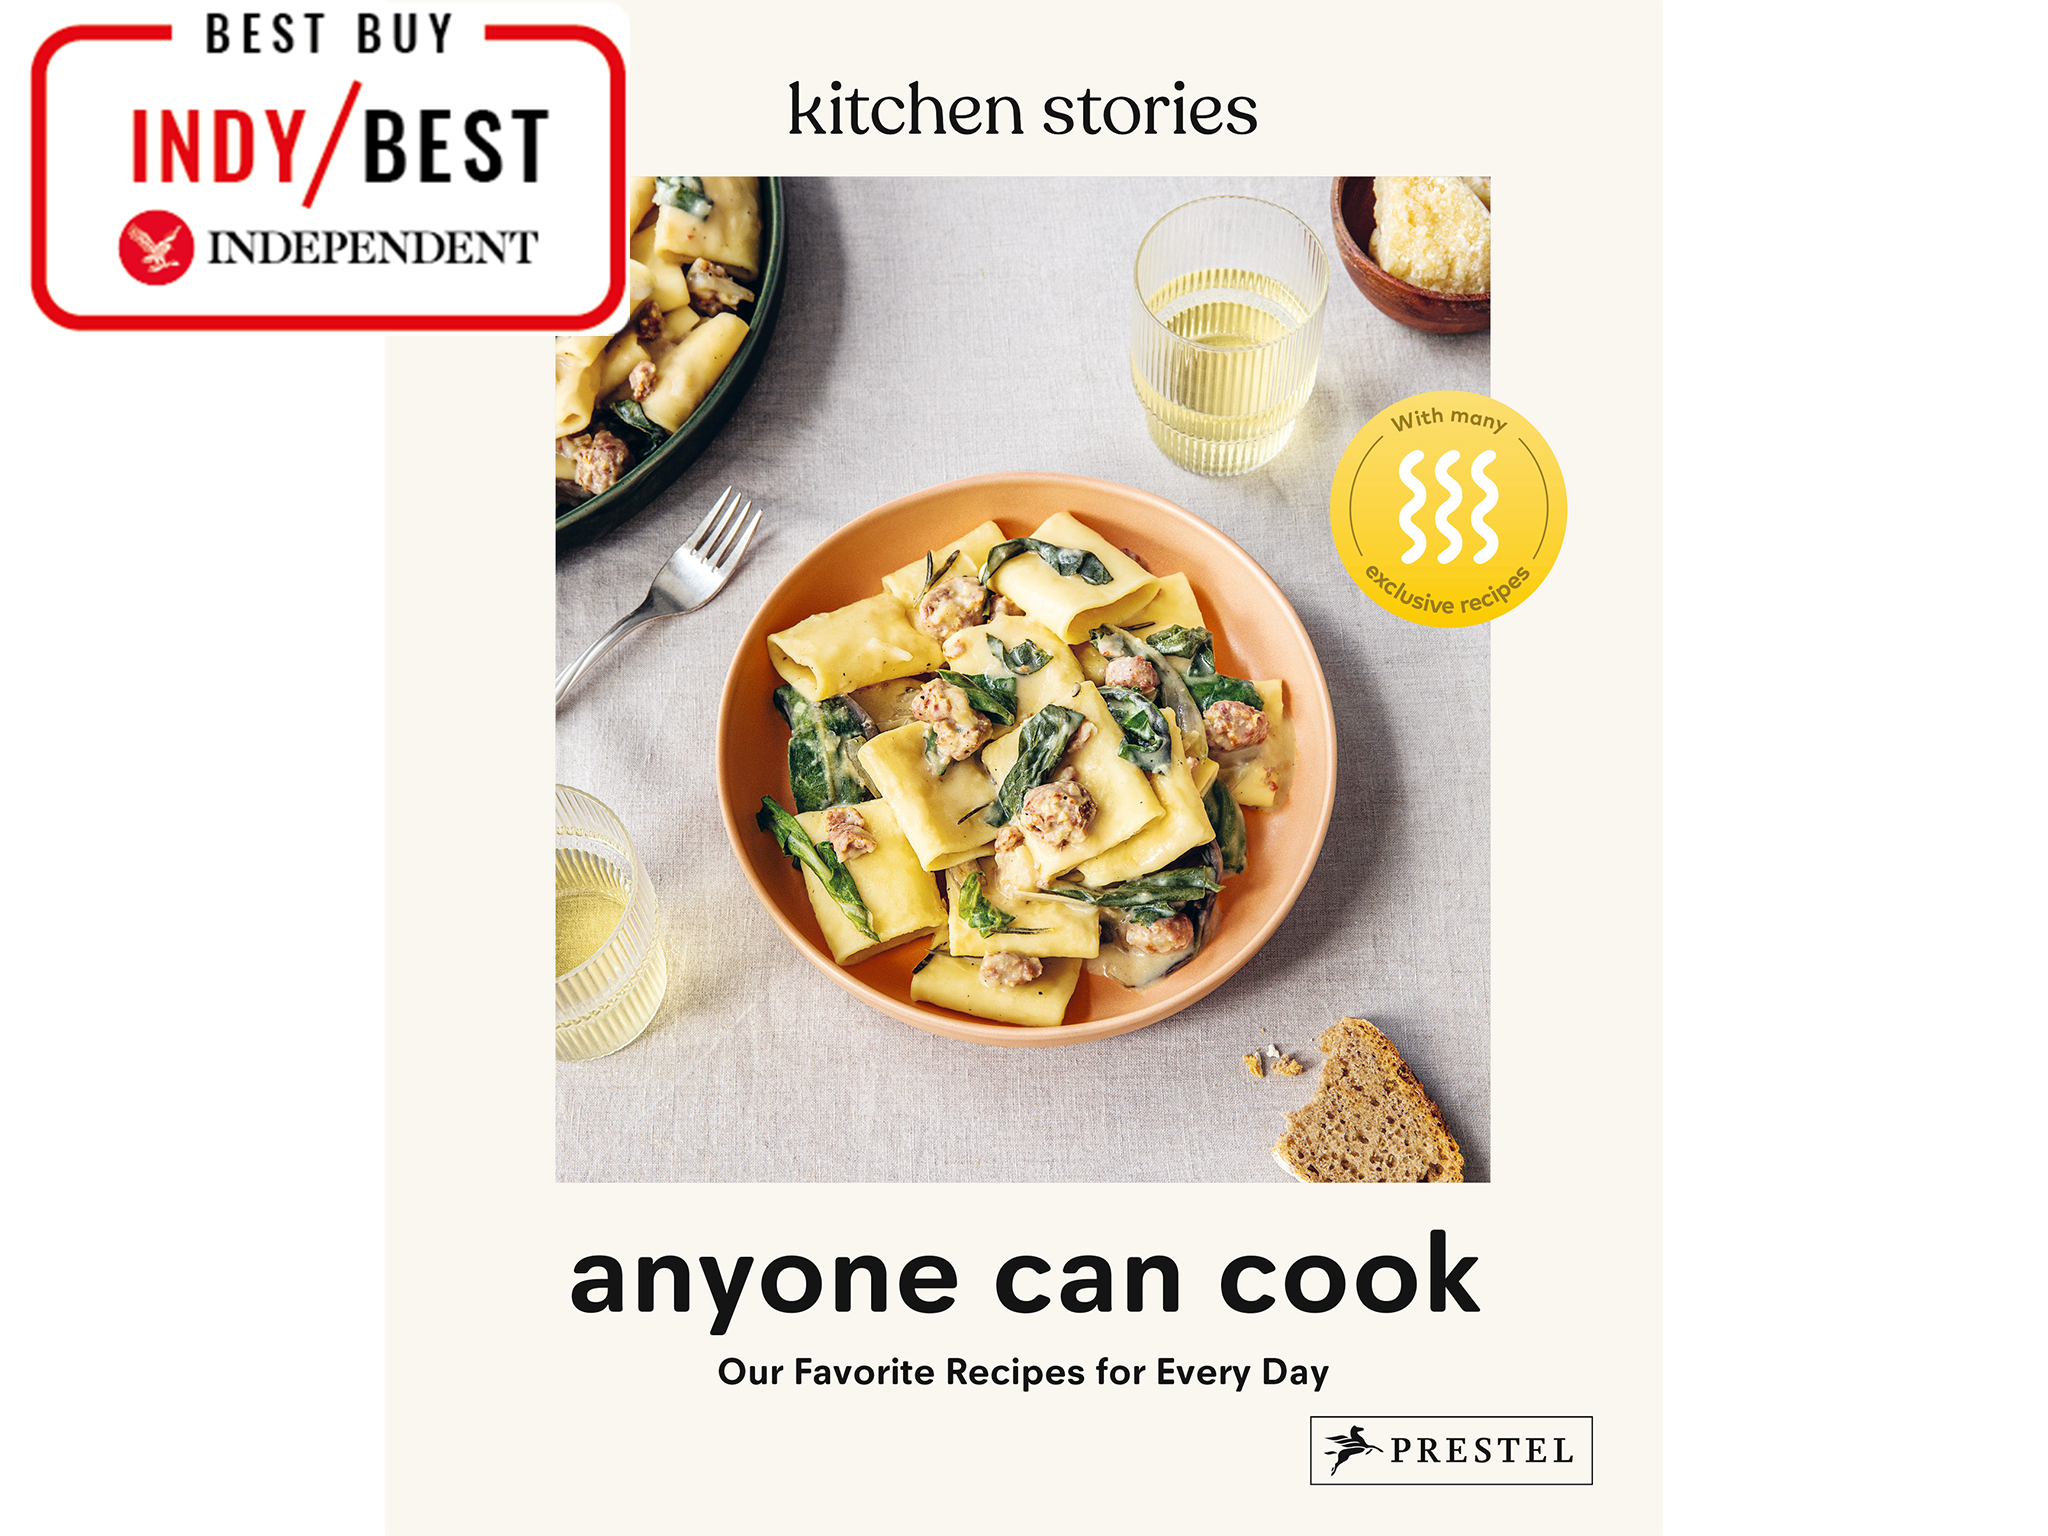 ‘Anyone can cook’ by Kitchen Stories, published by Prestel